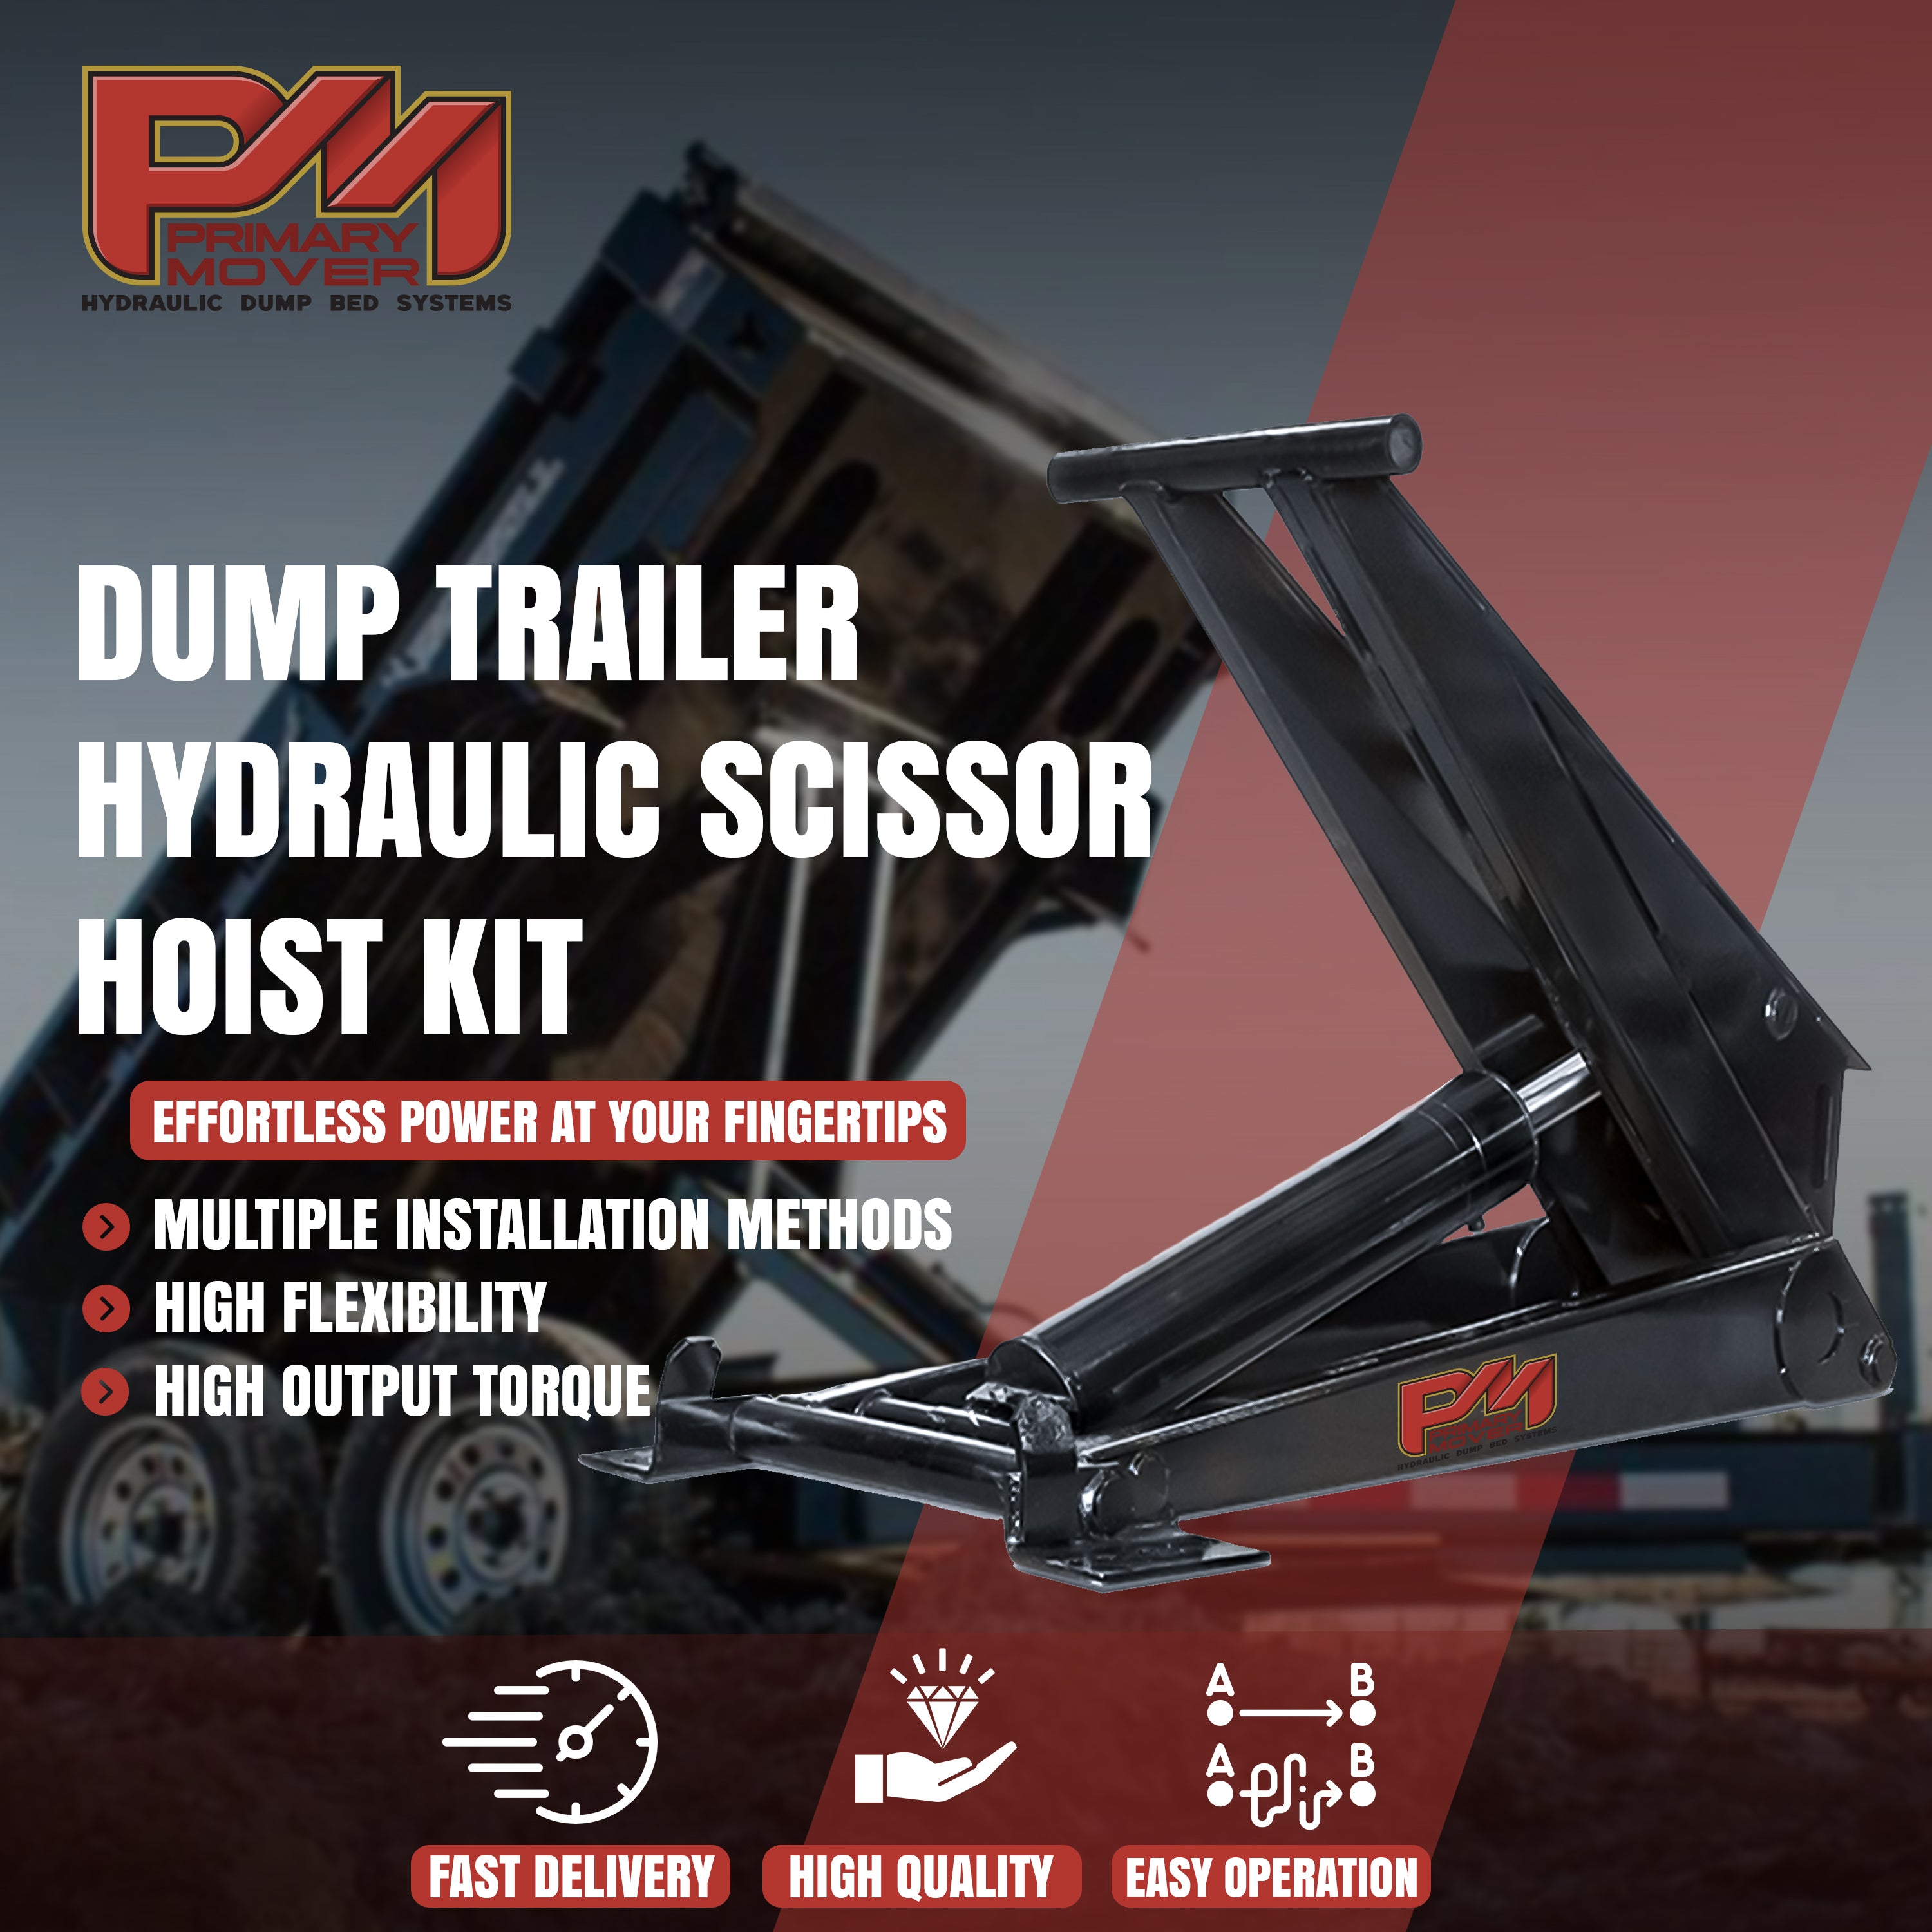 Hydraulic Scissor Hoist Kit - 12 Ton Capacity - Fits 18-24' Dump Body | PF-630. Image: Black metal scissor lifter with red and white text, a durable and reliable hoist kit for hydraulic dump needs.